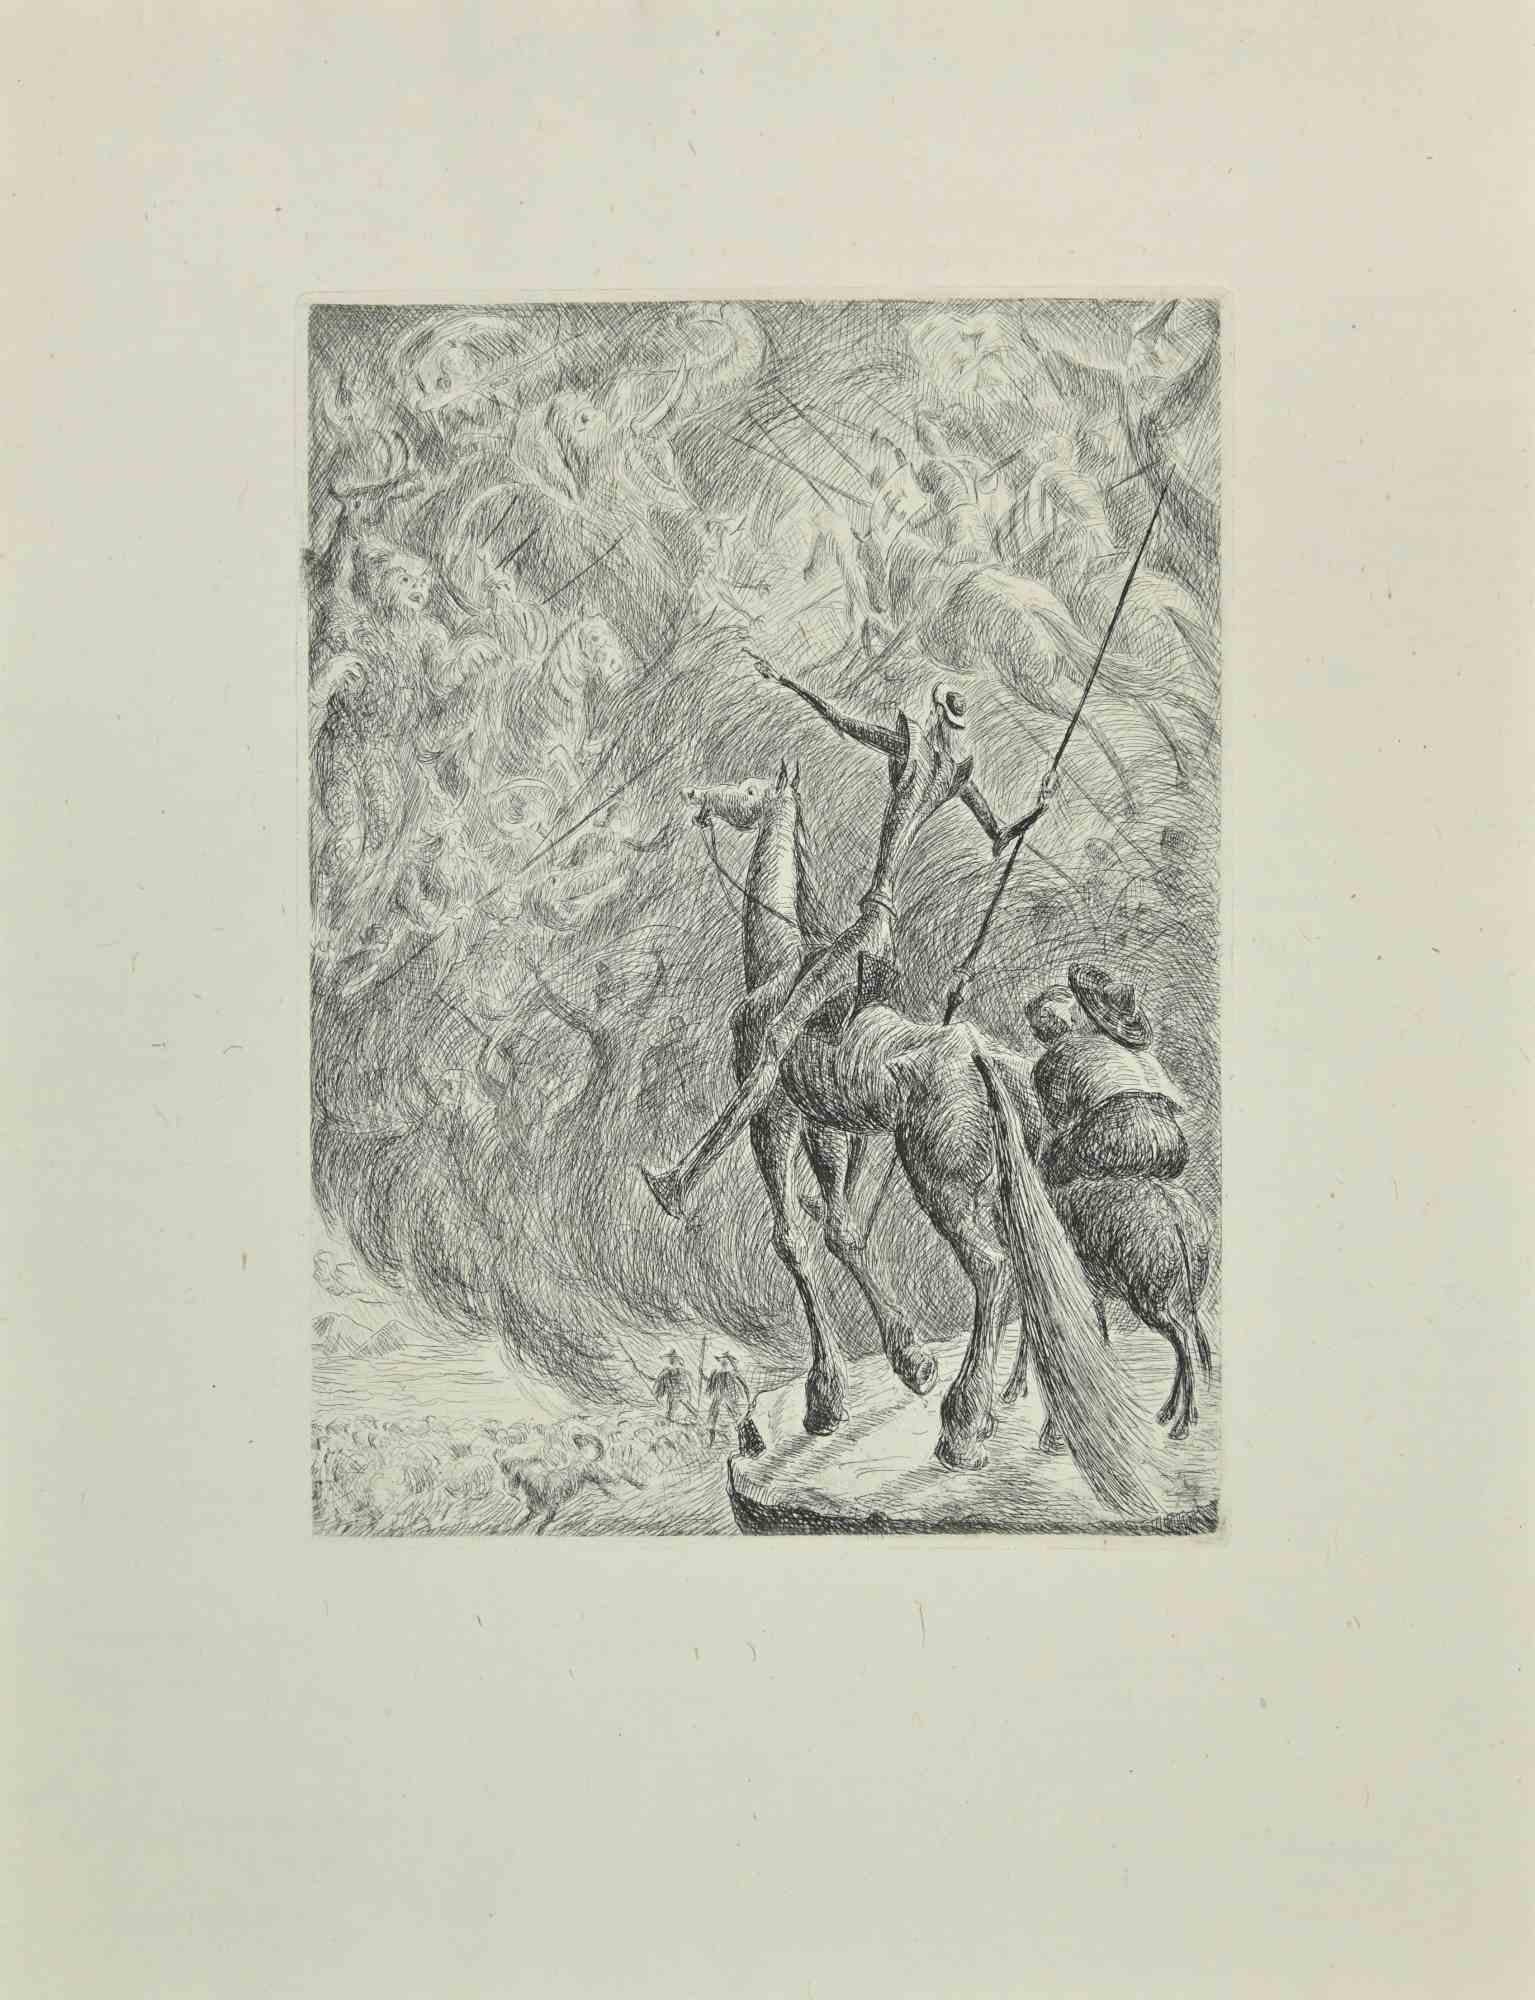 Don Quixote  and the Ghosts is an etching and drypoint print on ivory-colored China paper, realized by Wladyslaw Jahl in 1951.

It belongs to a limited edition of 125 specimens.

Good conditions.

The artwork represents a visual scene from Don